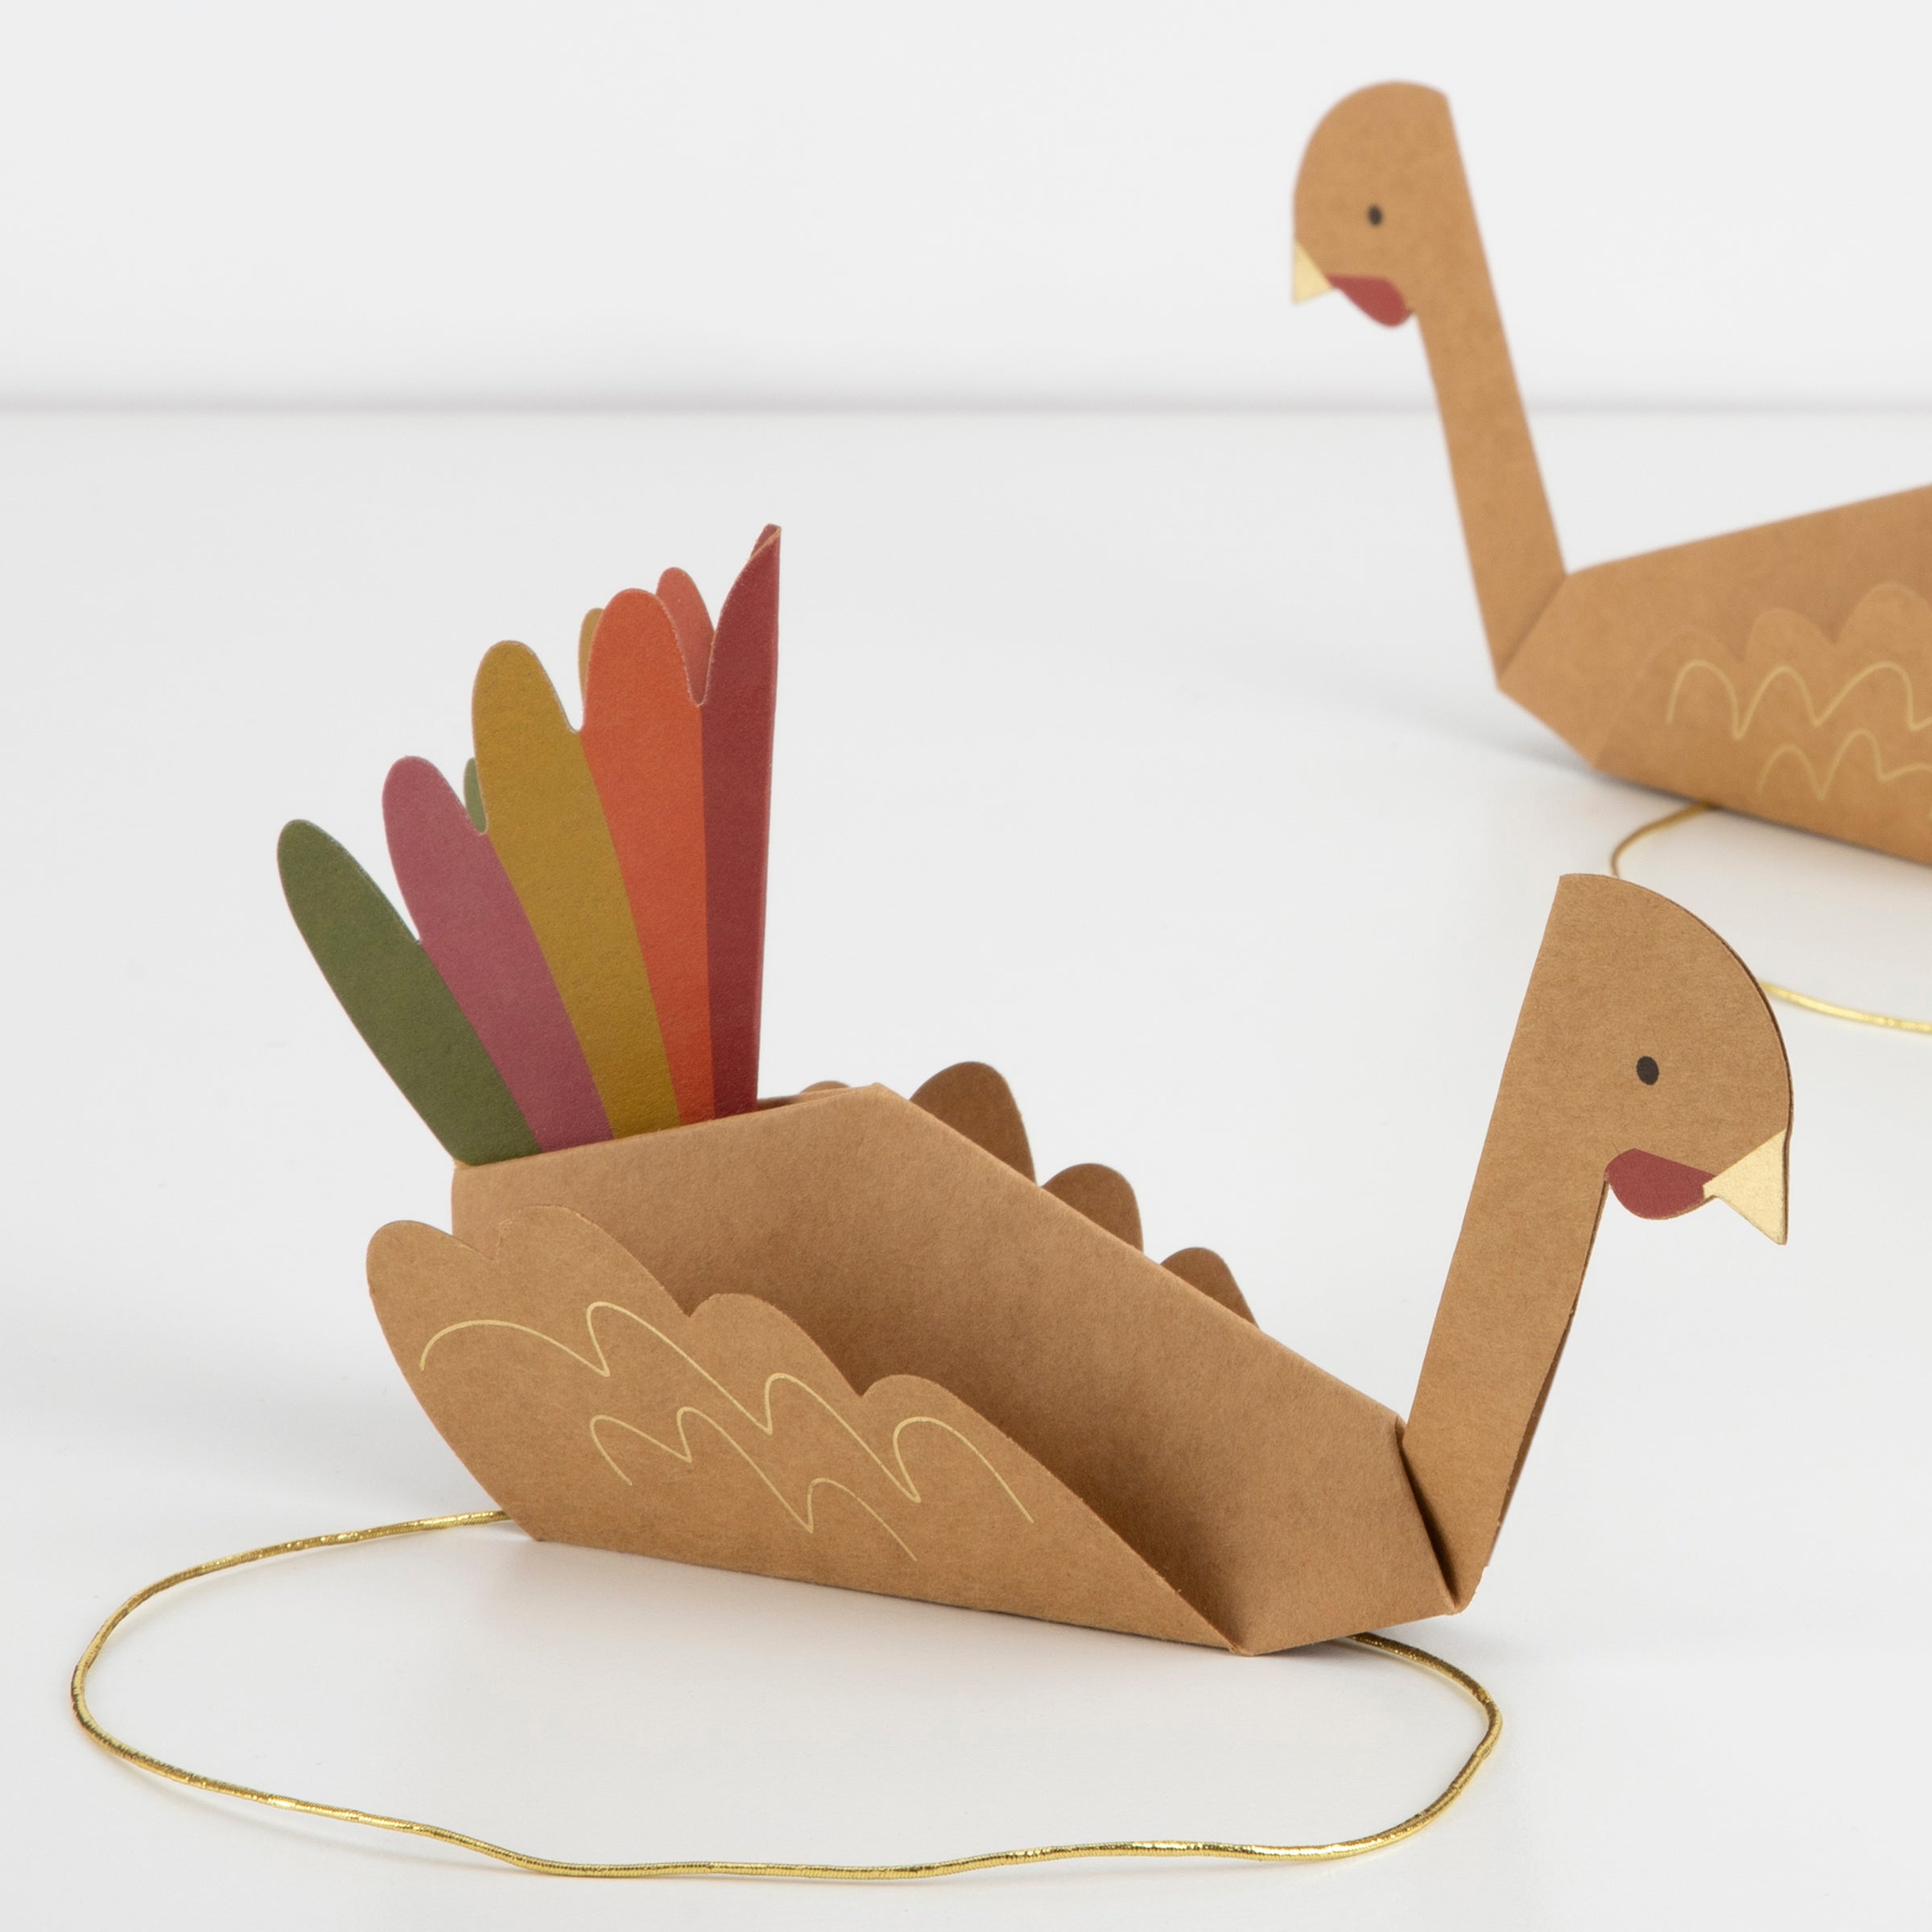 Colorful turkeys, crafted from paper, made the most wonderful Thanksgiving hats.